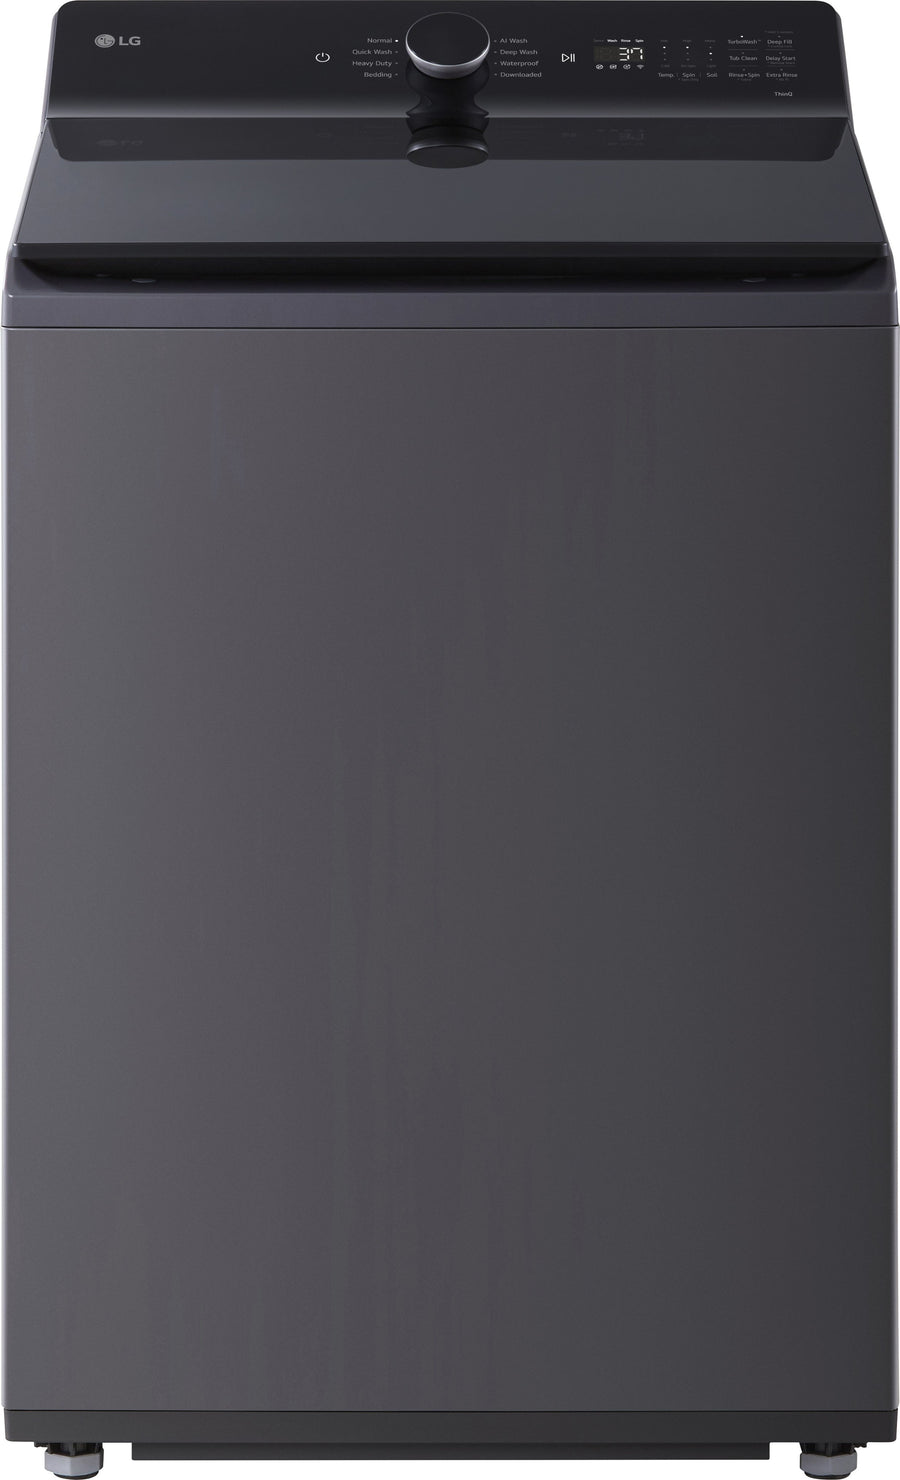 LG - 5.3 Cu. Ft. High Efficiency Smart Top Load Washer with TurboWash3D Technology - Matte Black_0